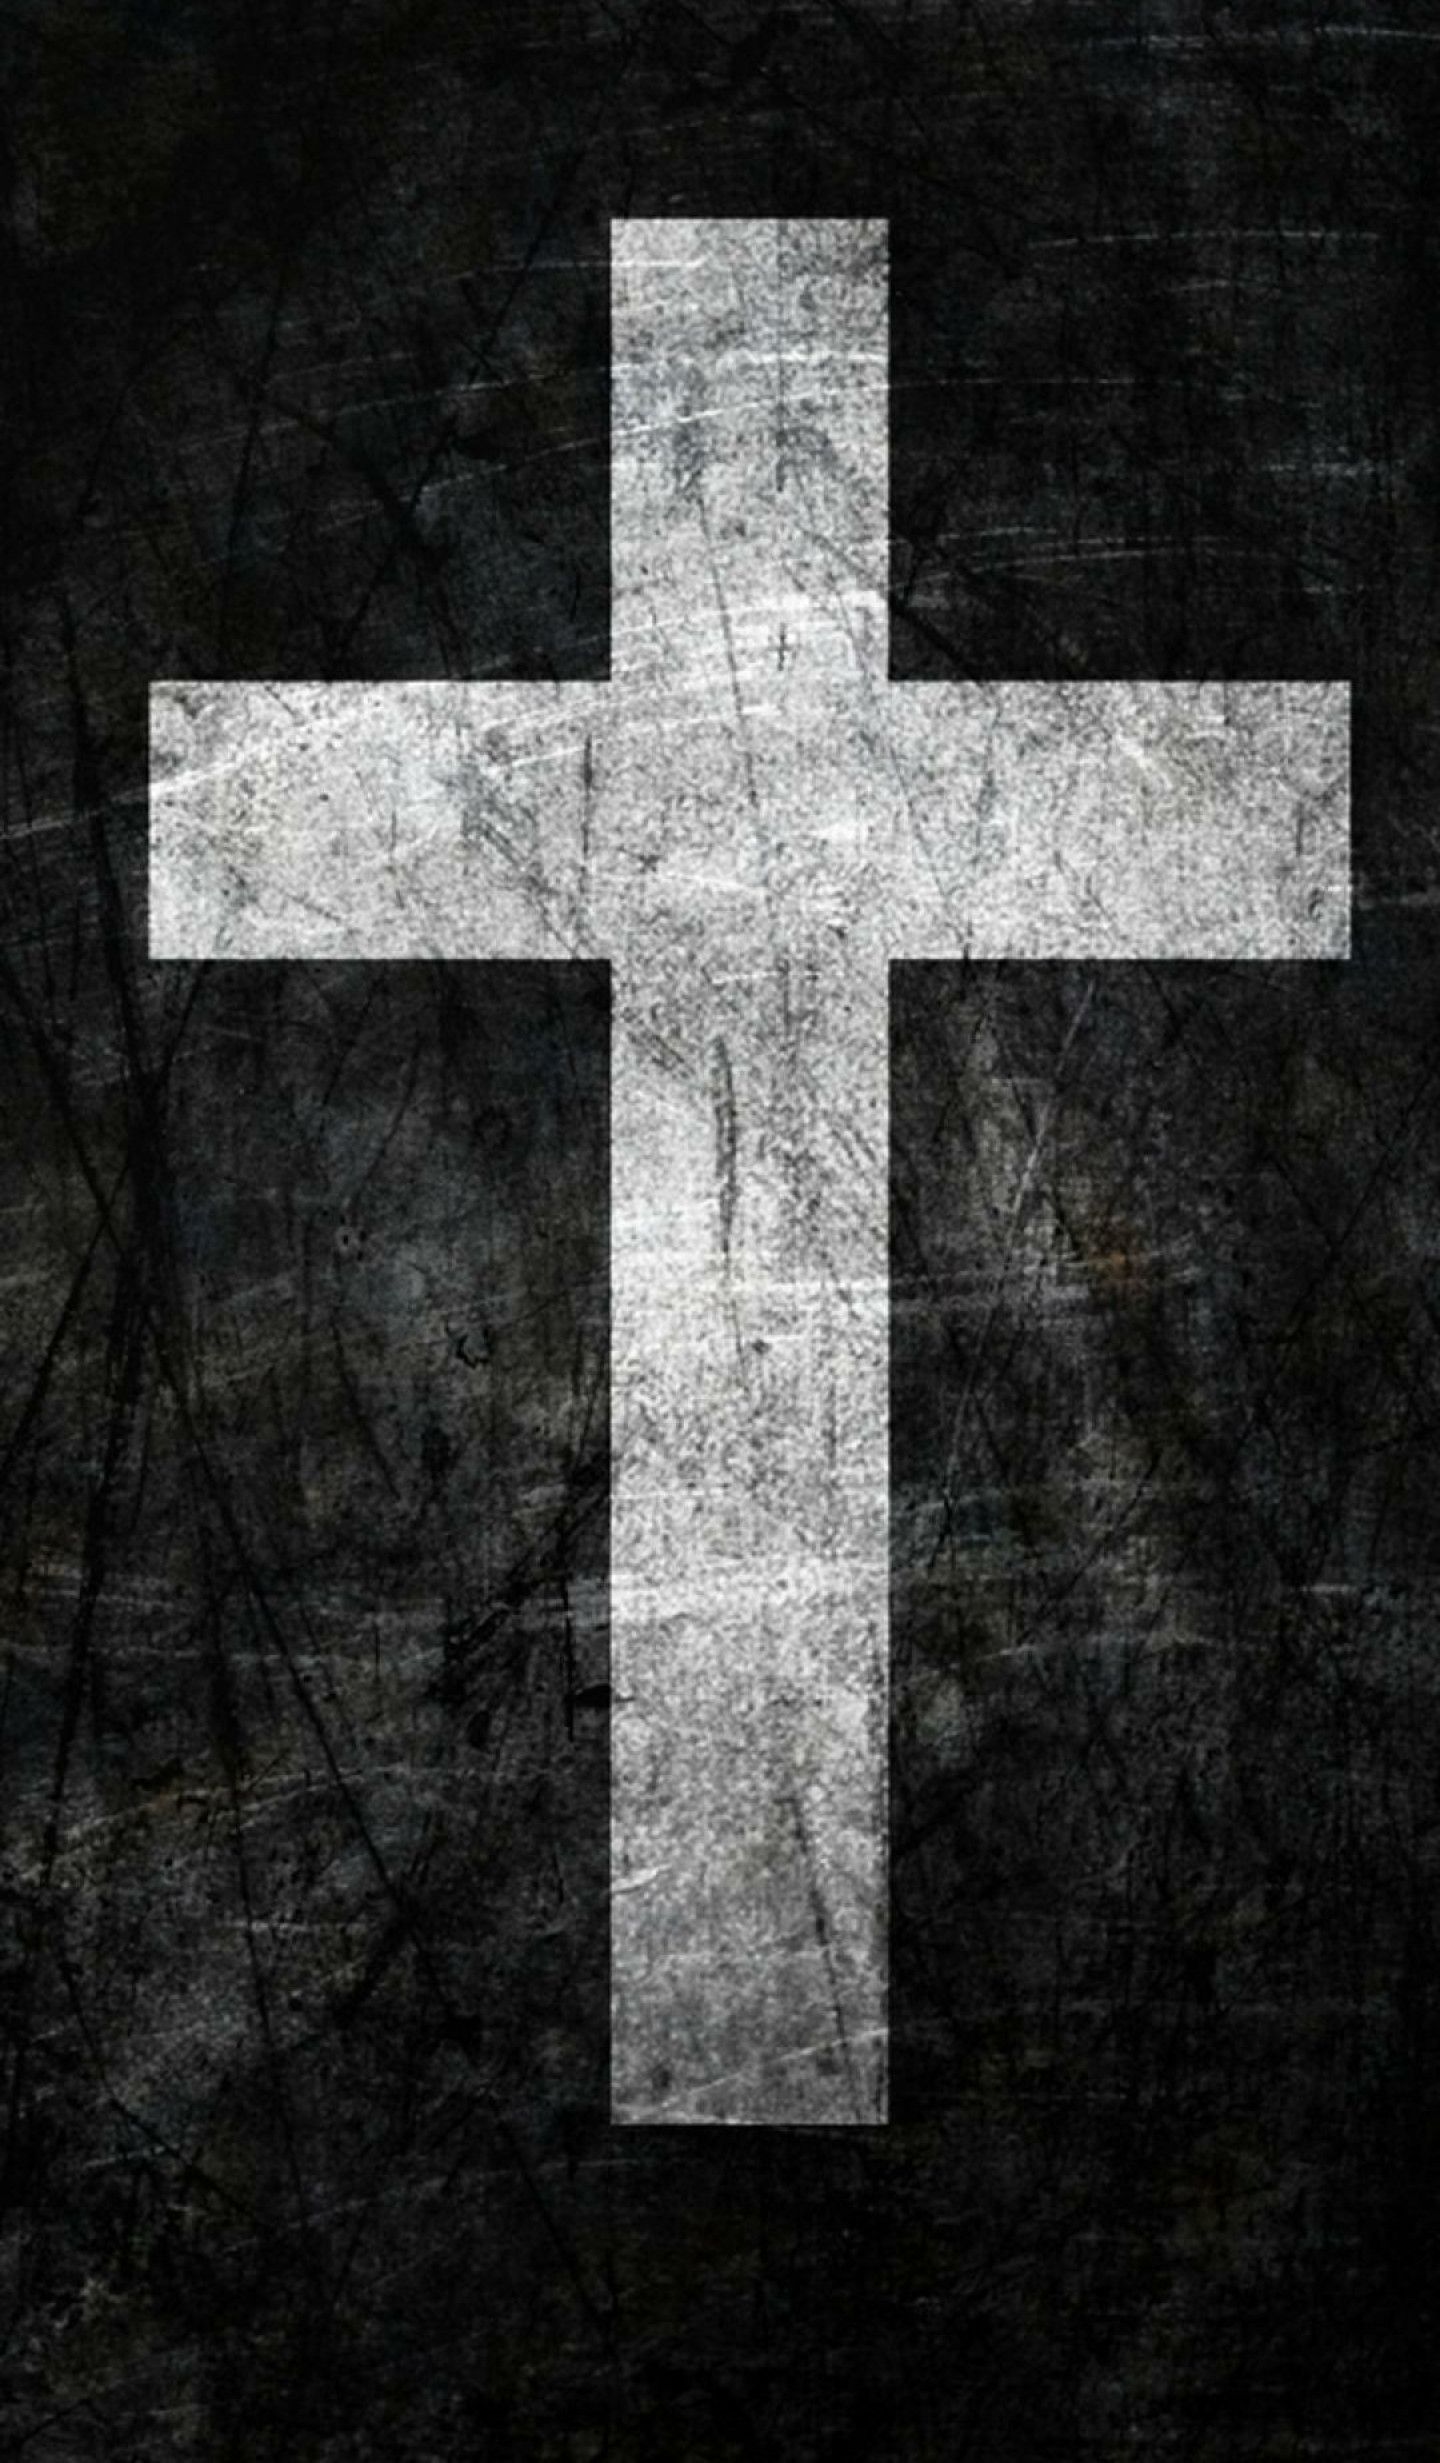 Christian Phone Wallpapers